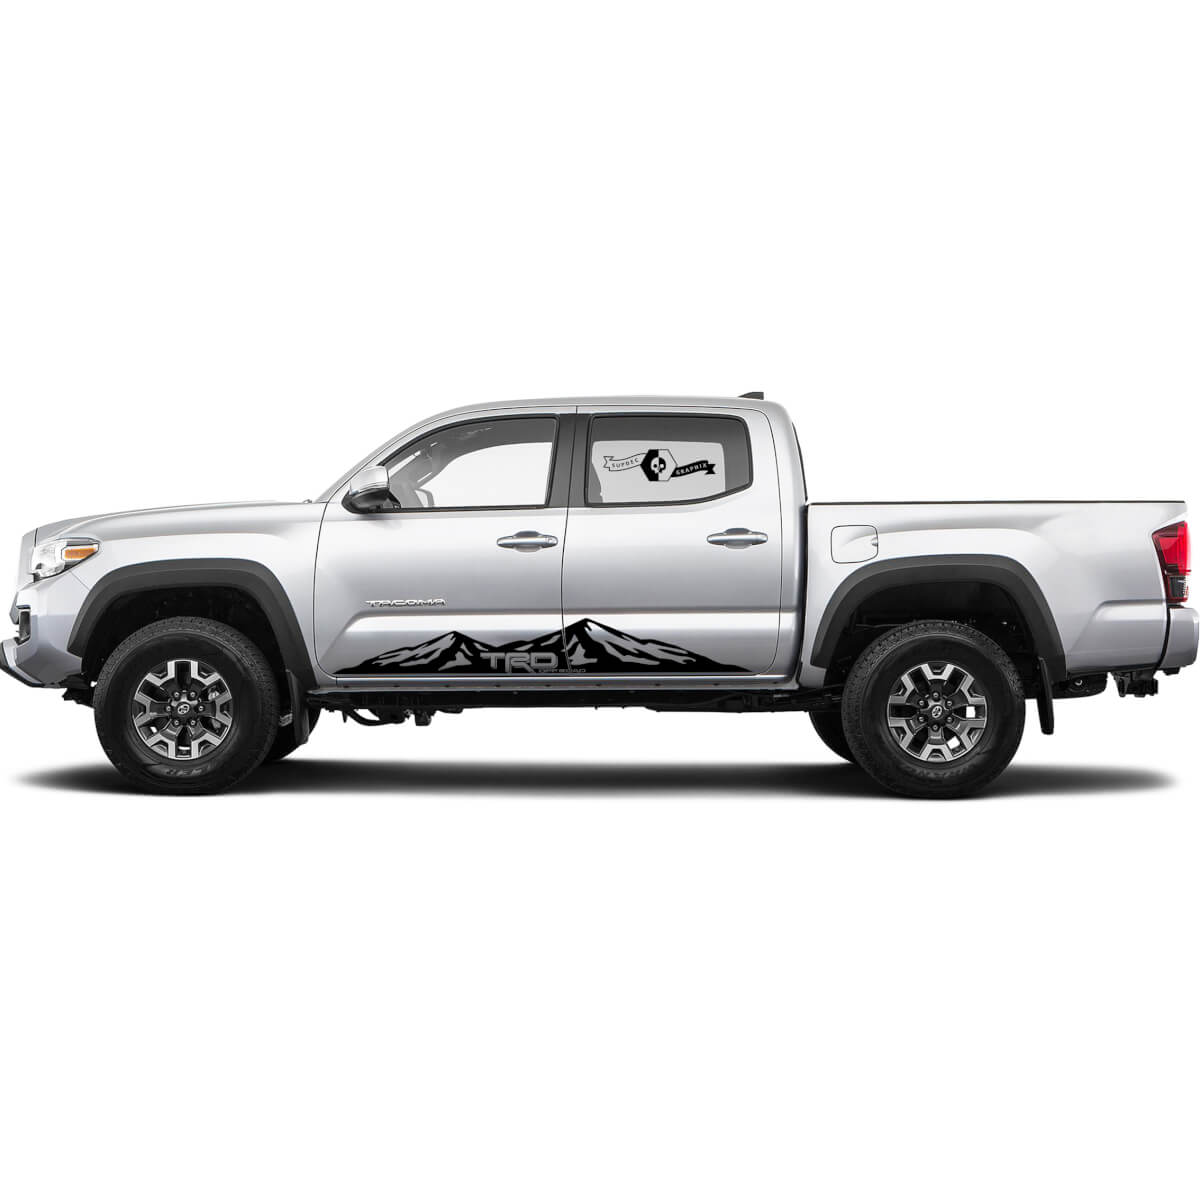 TRD off road Mountains Style for Side Rocker Panel Truck Decals Stickers for Tacoma Tundra Hilux 4Runner 3